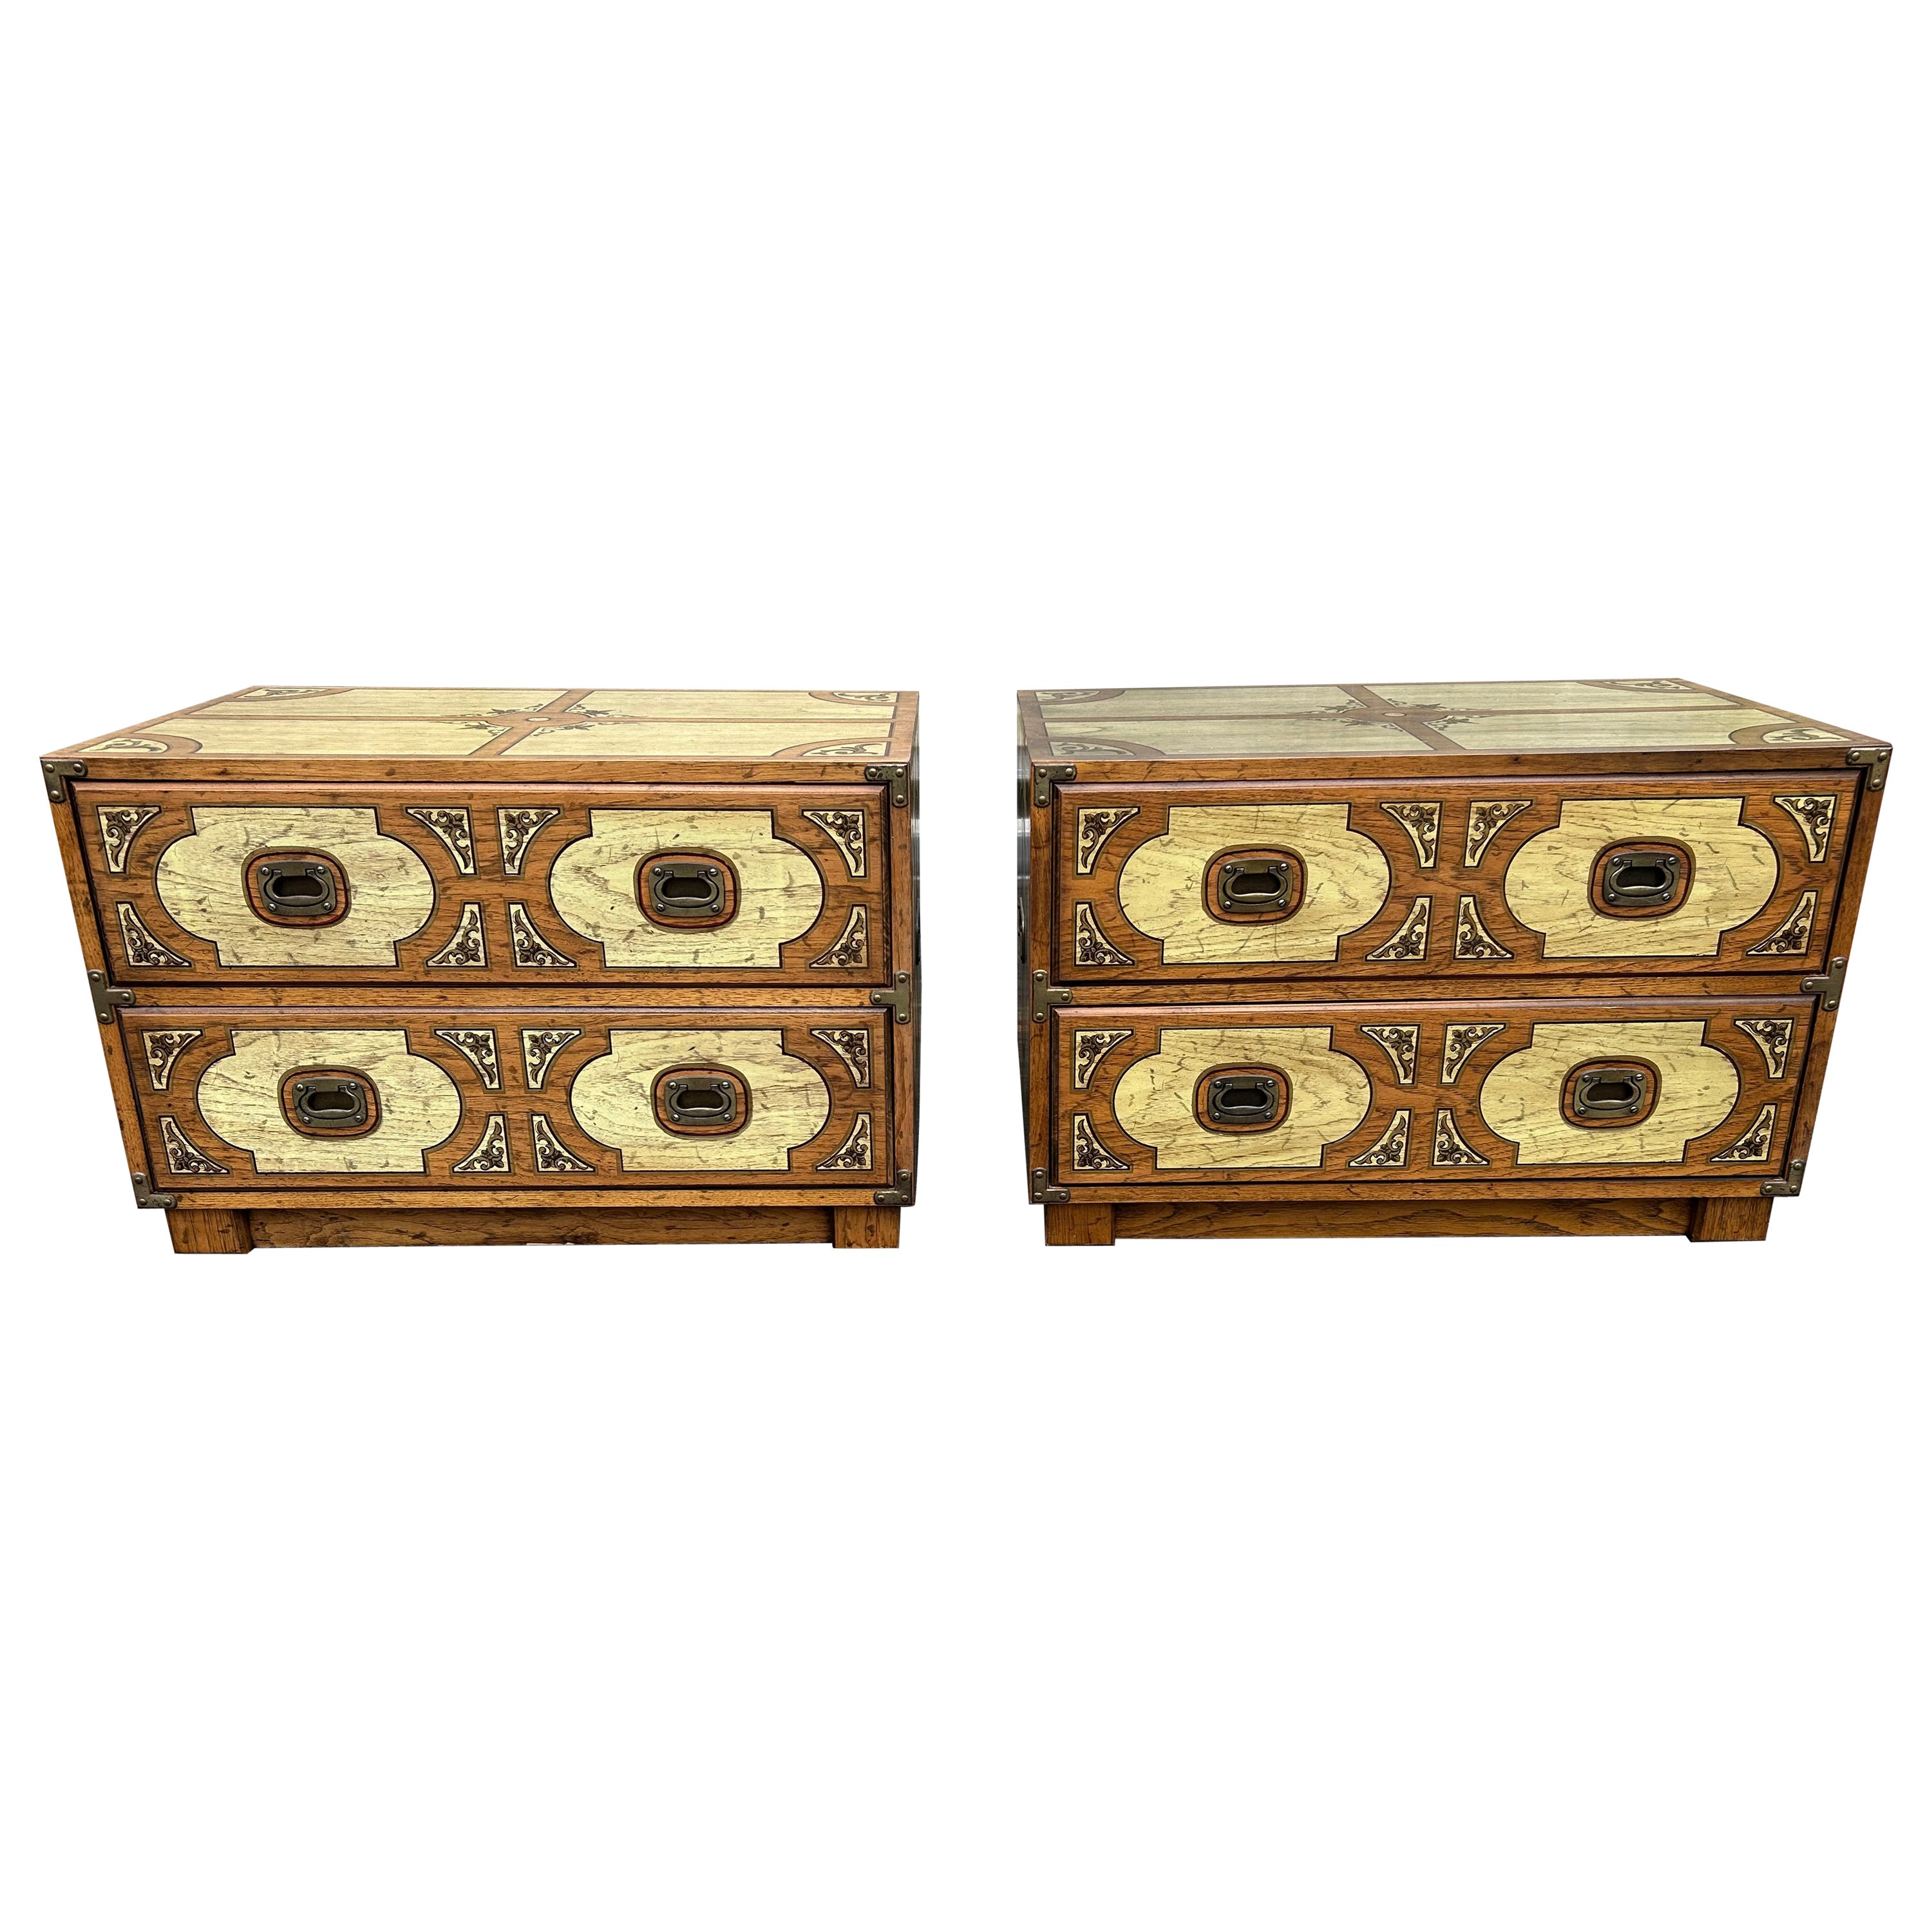 Fabulous Pair Drexel Campaign Chest Oxford Square Mid-Century Modern